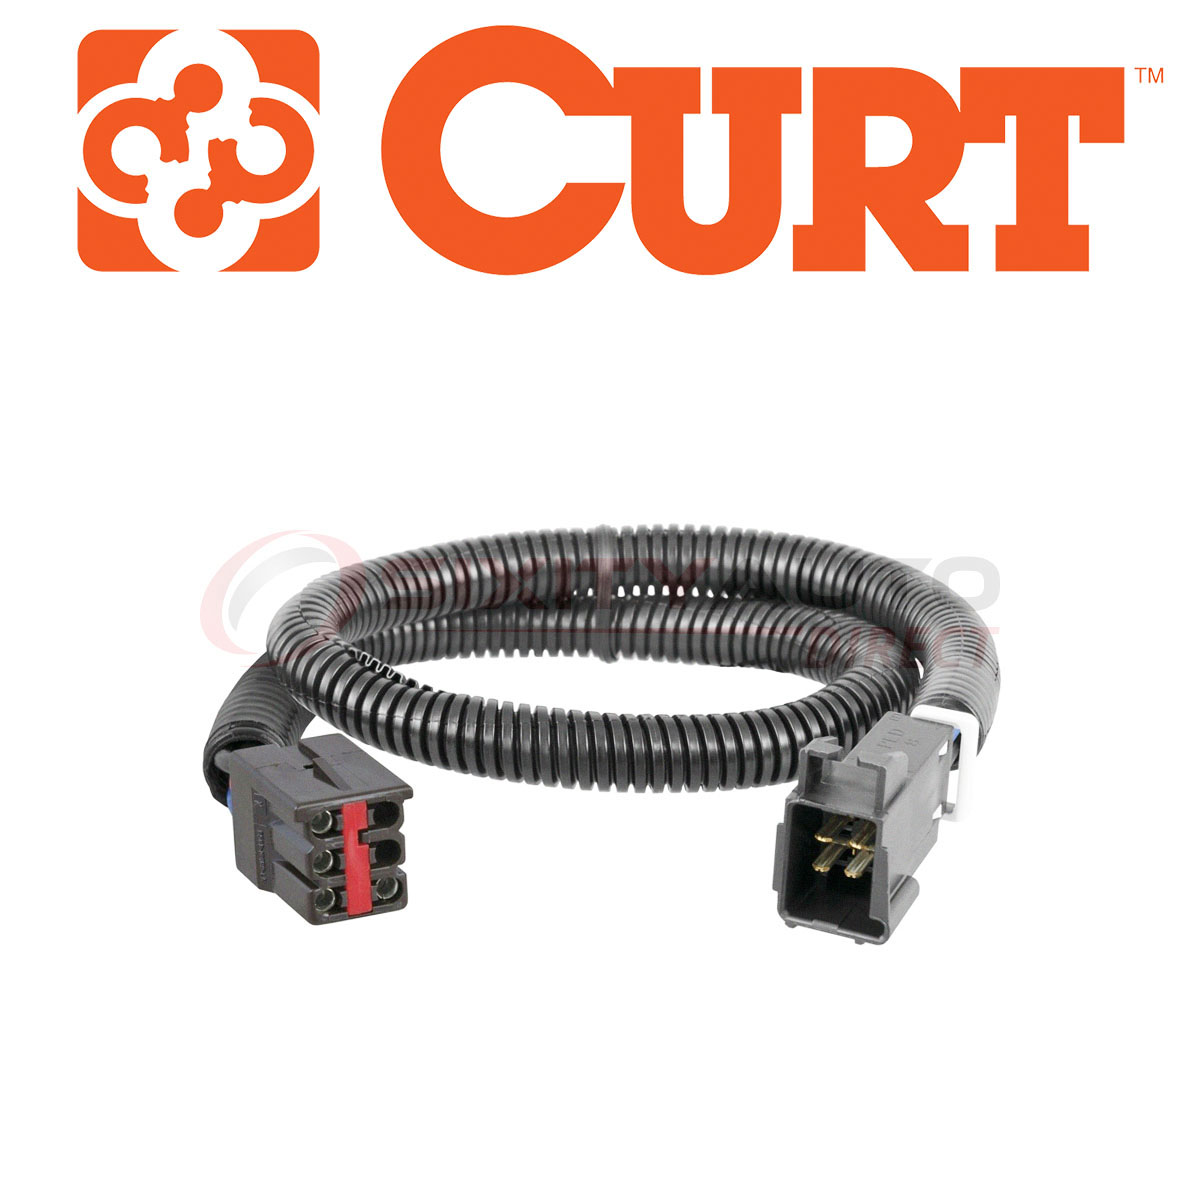 CURT Trailer Brake Control Adapter Harness for 2004 Ford F-150 Heritage 2004 F150 Trailer Brake Controller Harness